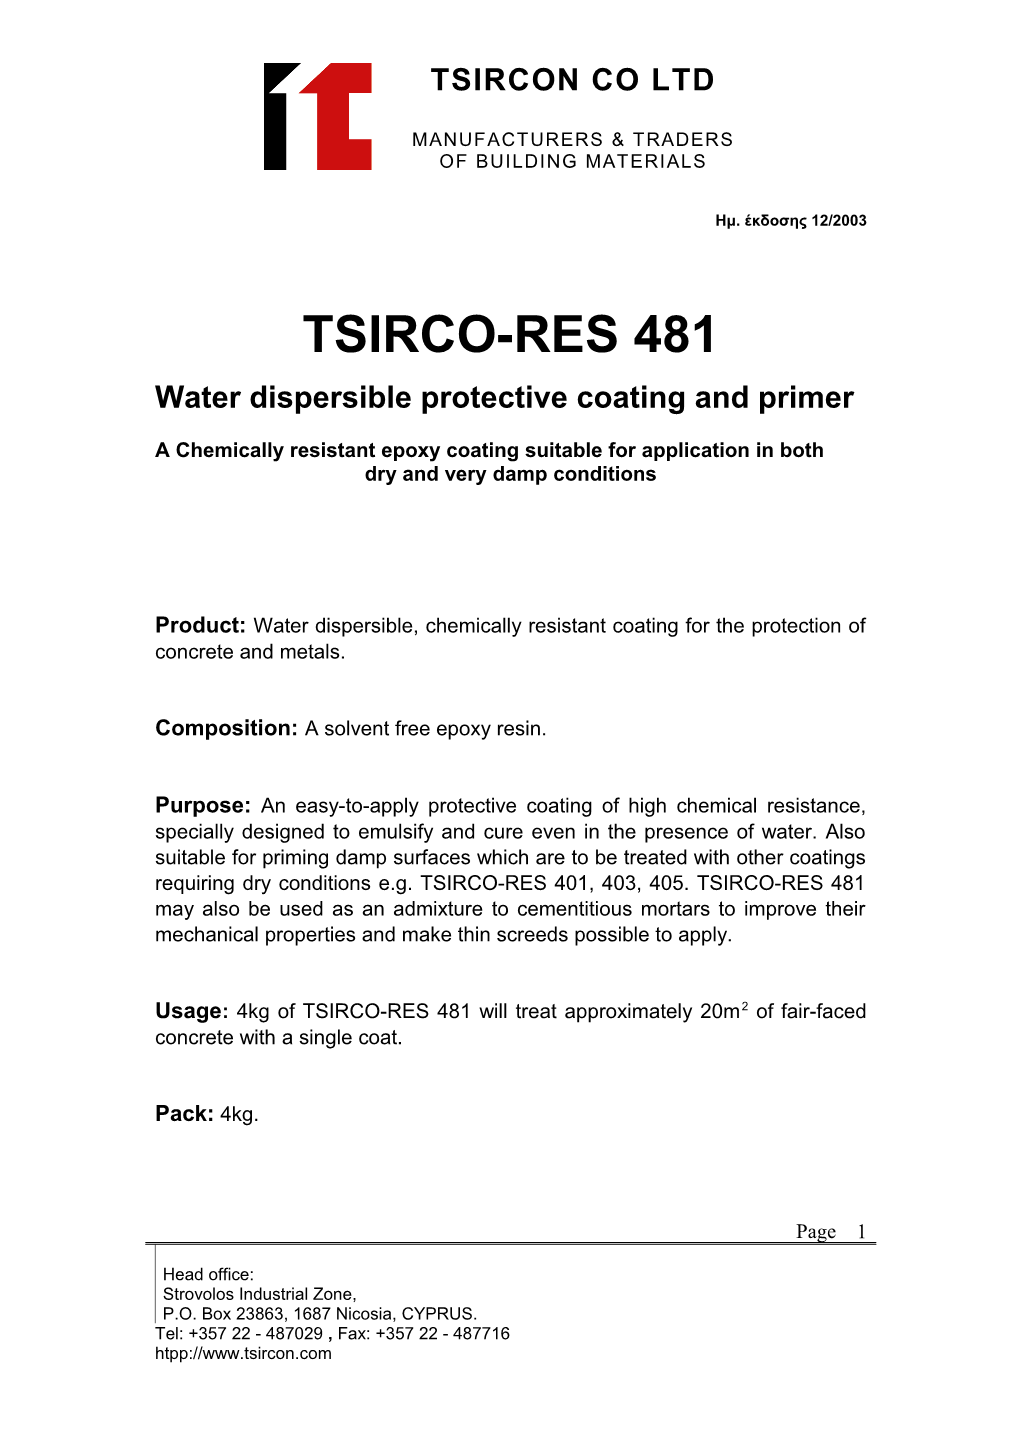 Water Dispersible Protective Coating and Primer